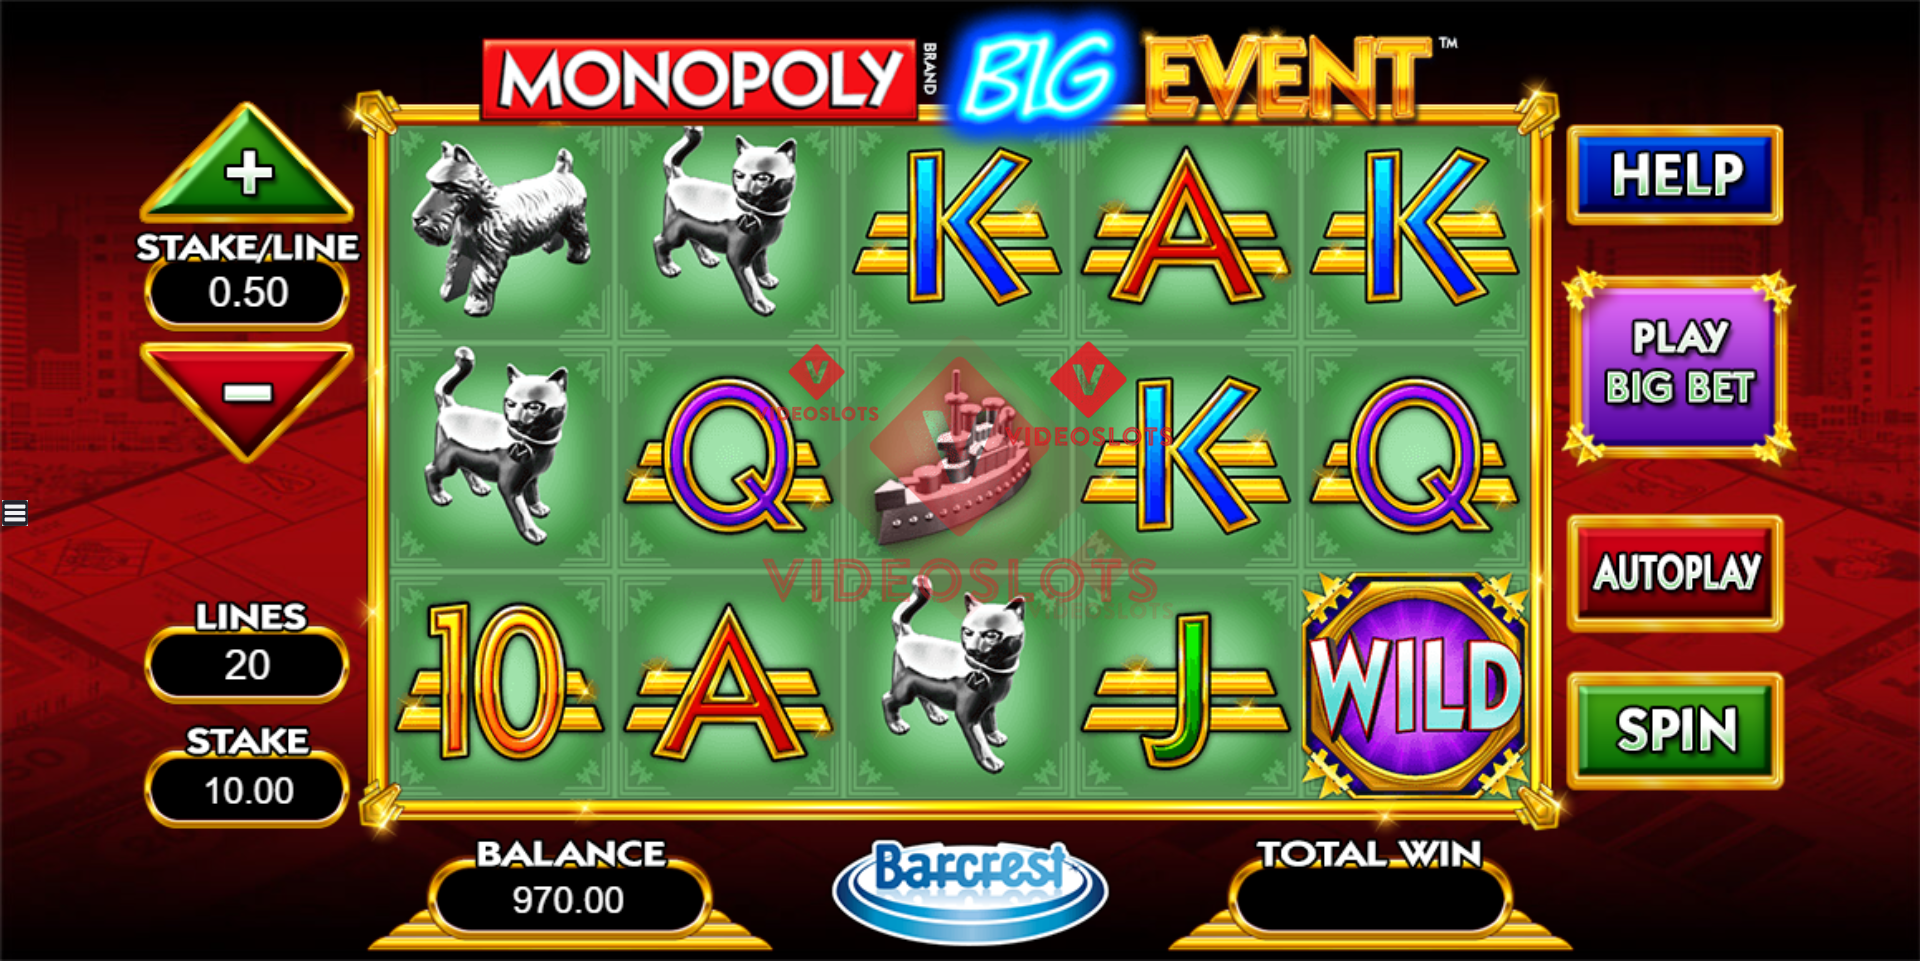 Base Game for Monopoly Big Event slot from Barcrest